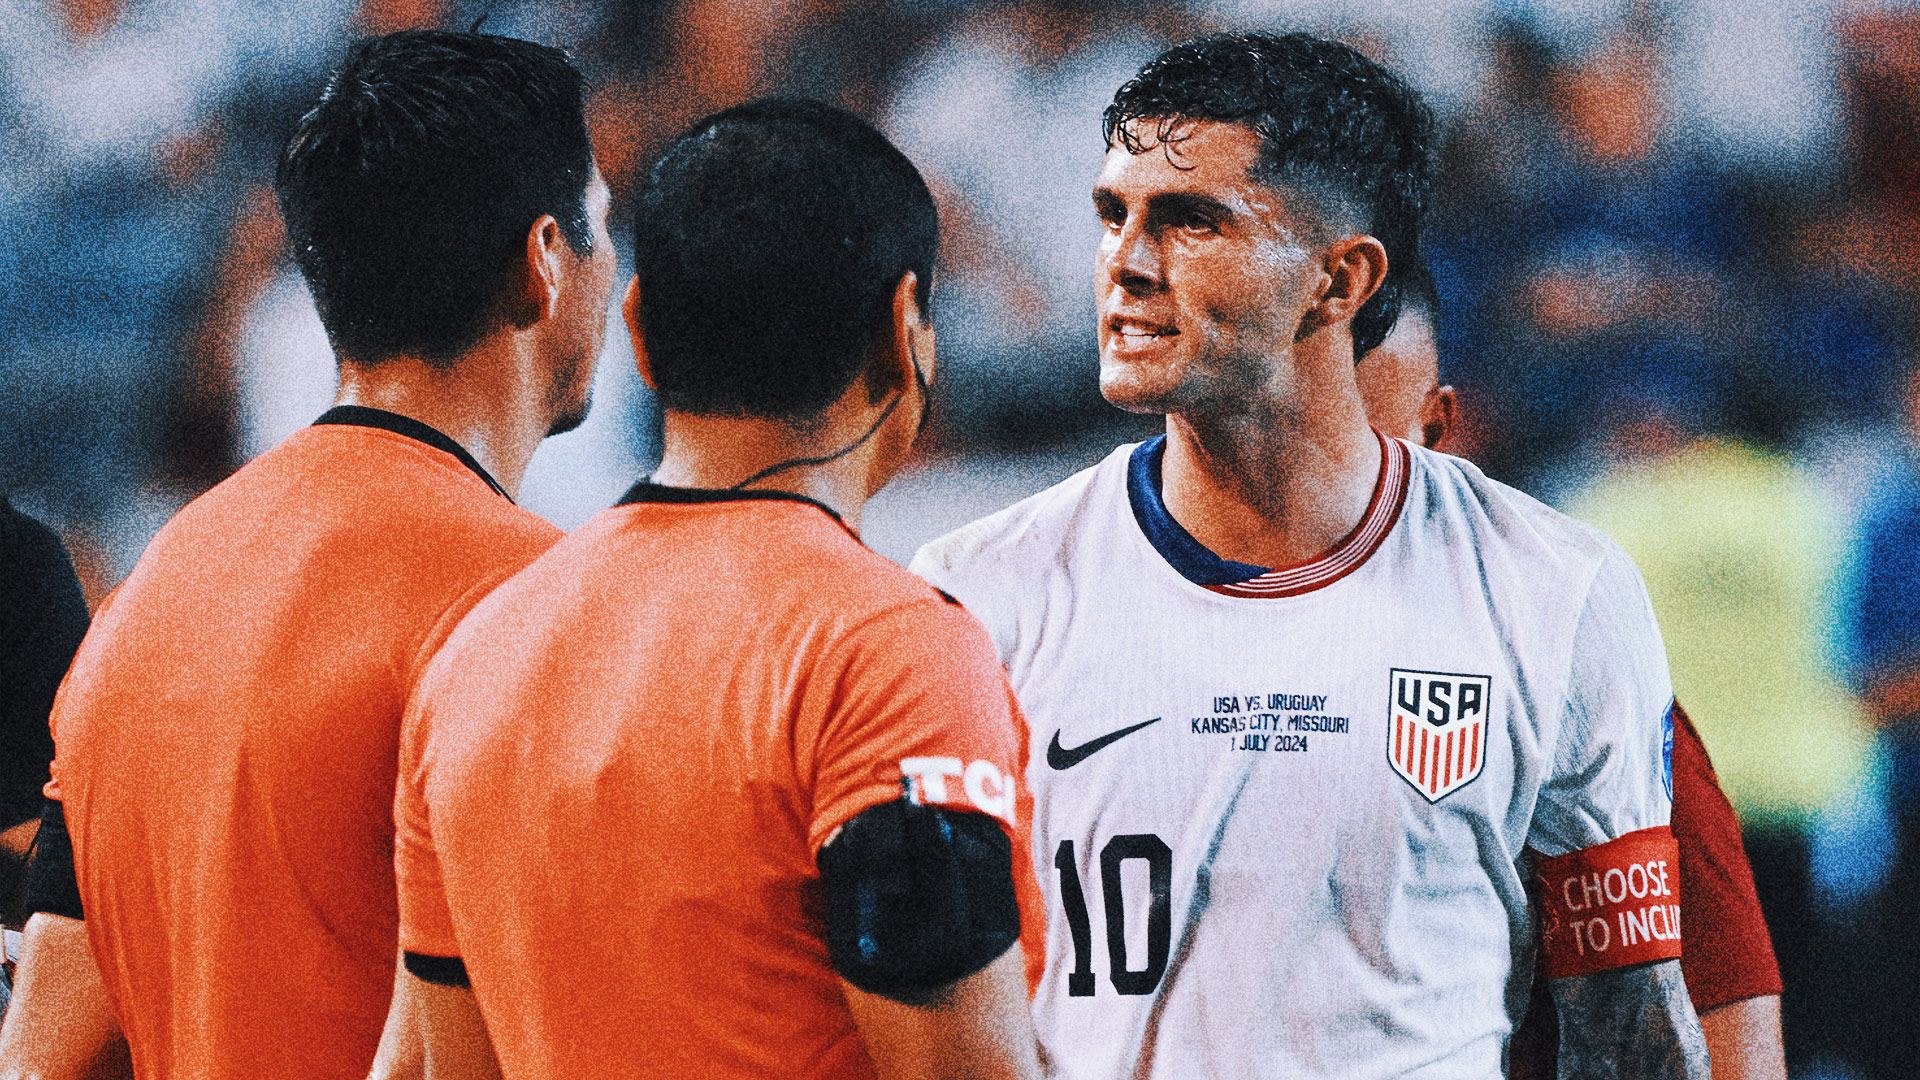 Head referee for USA-Uruguay snubs handshake from Christian Pulisic